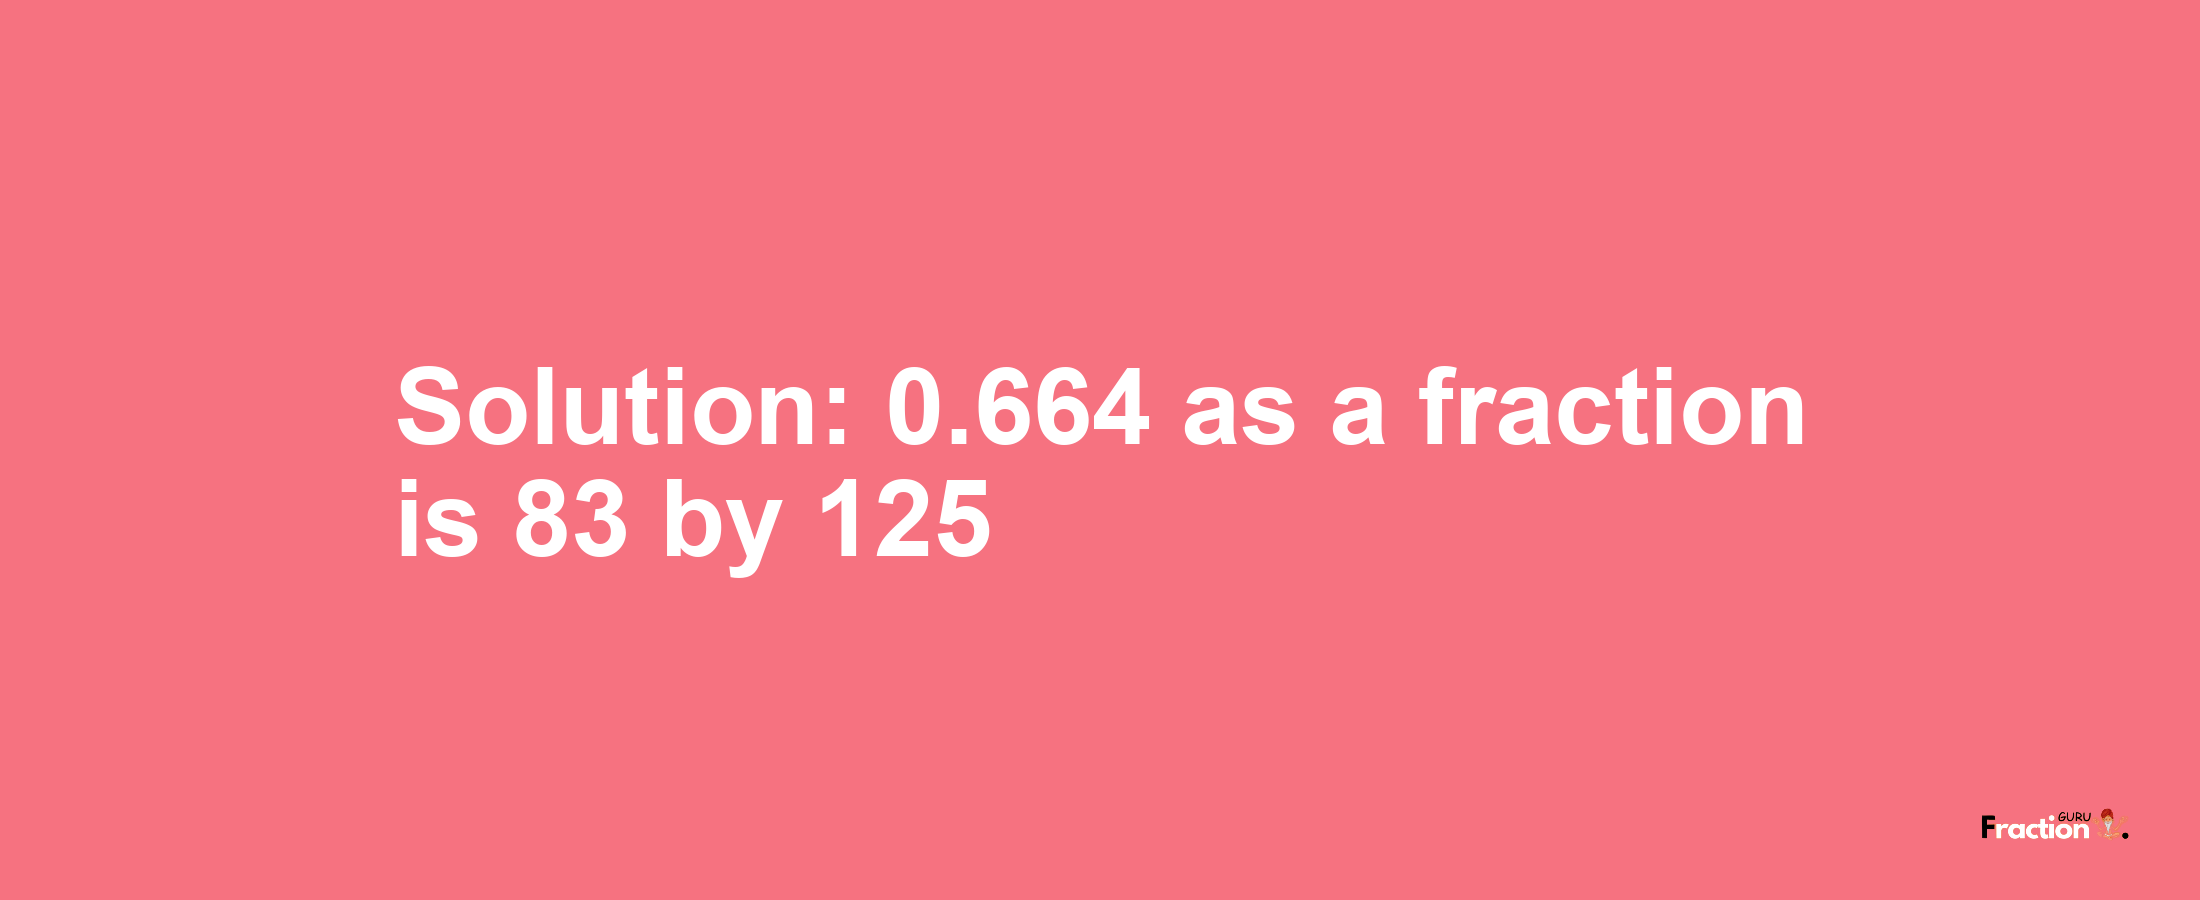 Solution:0.664 as a fraction is 83/125